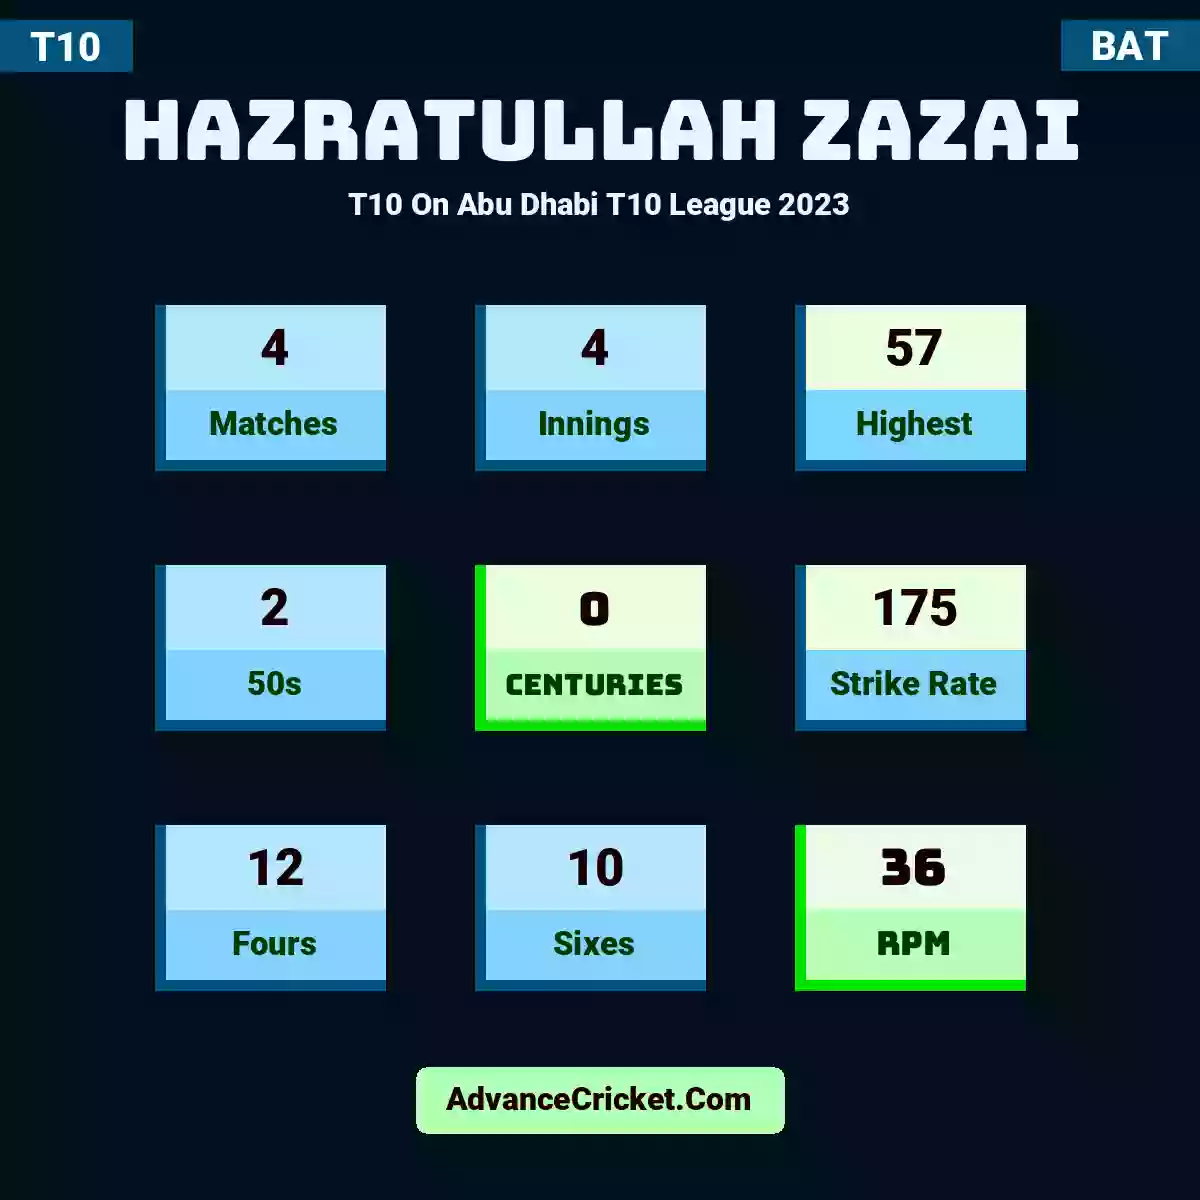 Hazratullah Zazai T10  On Abu Dhabi T10 League 2023, Hazratullah Zazai played 4 matches, scored 57 runs as highest, 2 half-centuries, and 0 centuries, with a strike rate of 175. H.Zazai hit 12 fours and 10 sixes, with an RPM of 36.